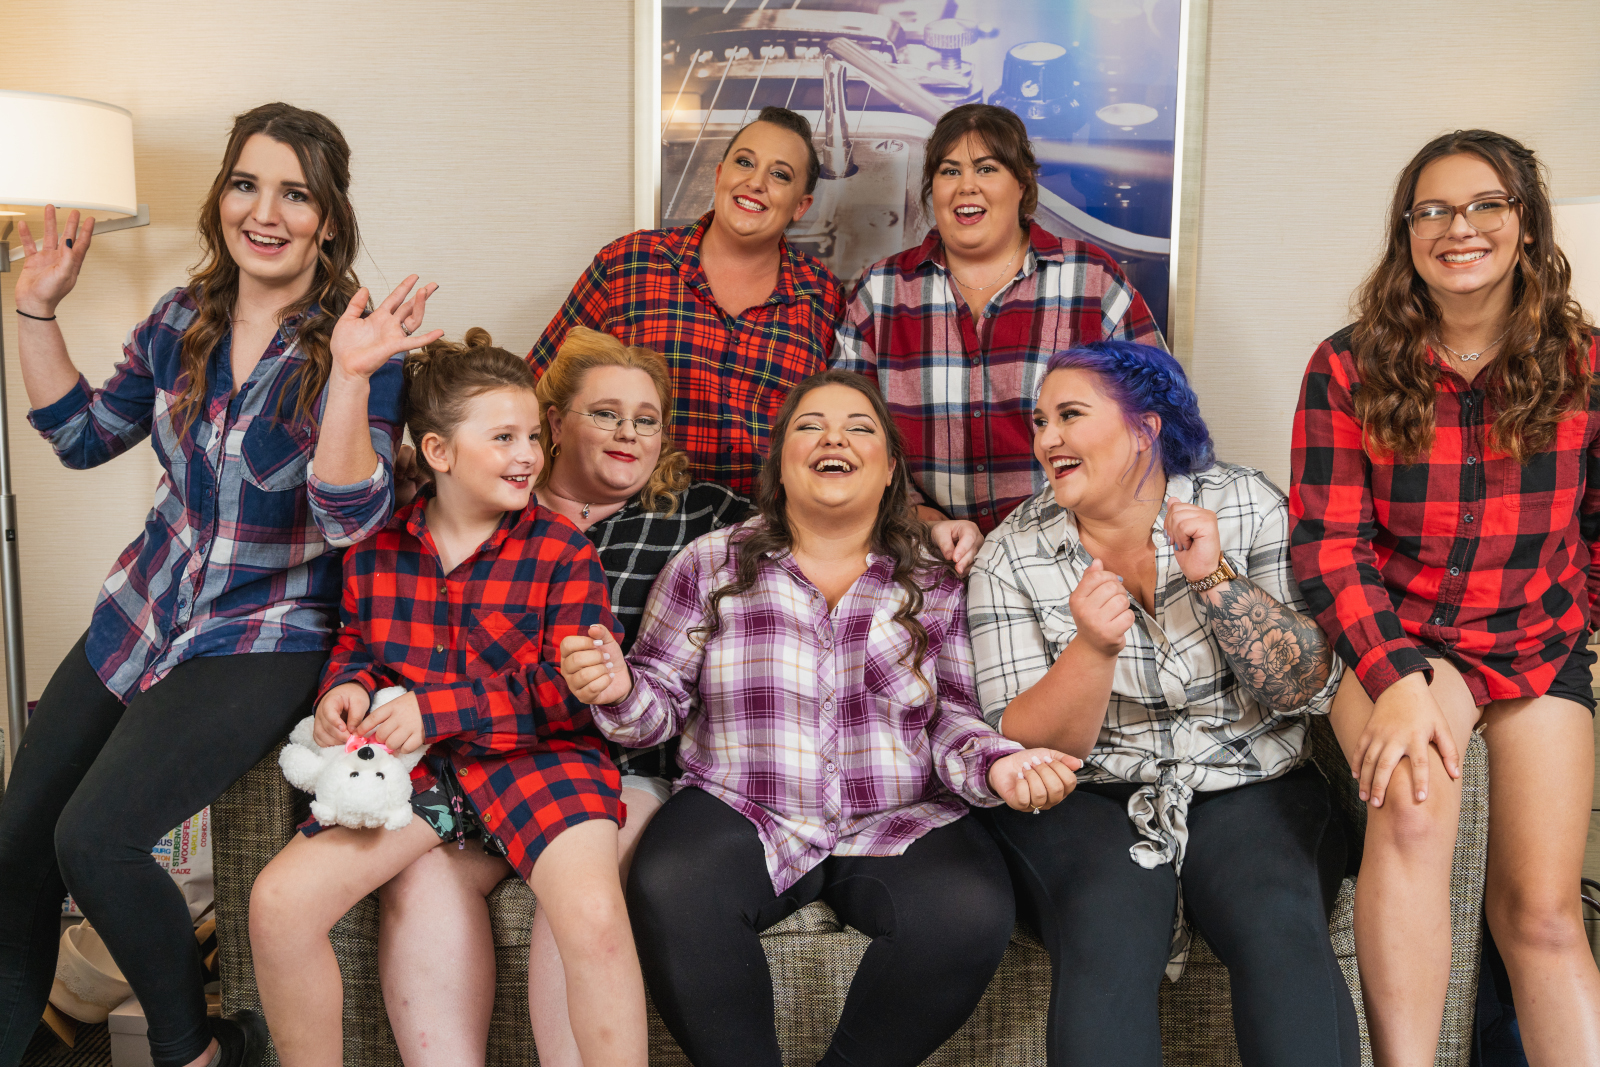 Bride with bridesmaids and flower girl getting ready, wedding preparation, bridal party portrait, fun bridal party portrait, laughing, matching flannel, outdoor September wedding ceremony at Westfall Event Center